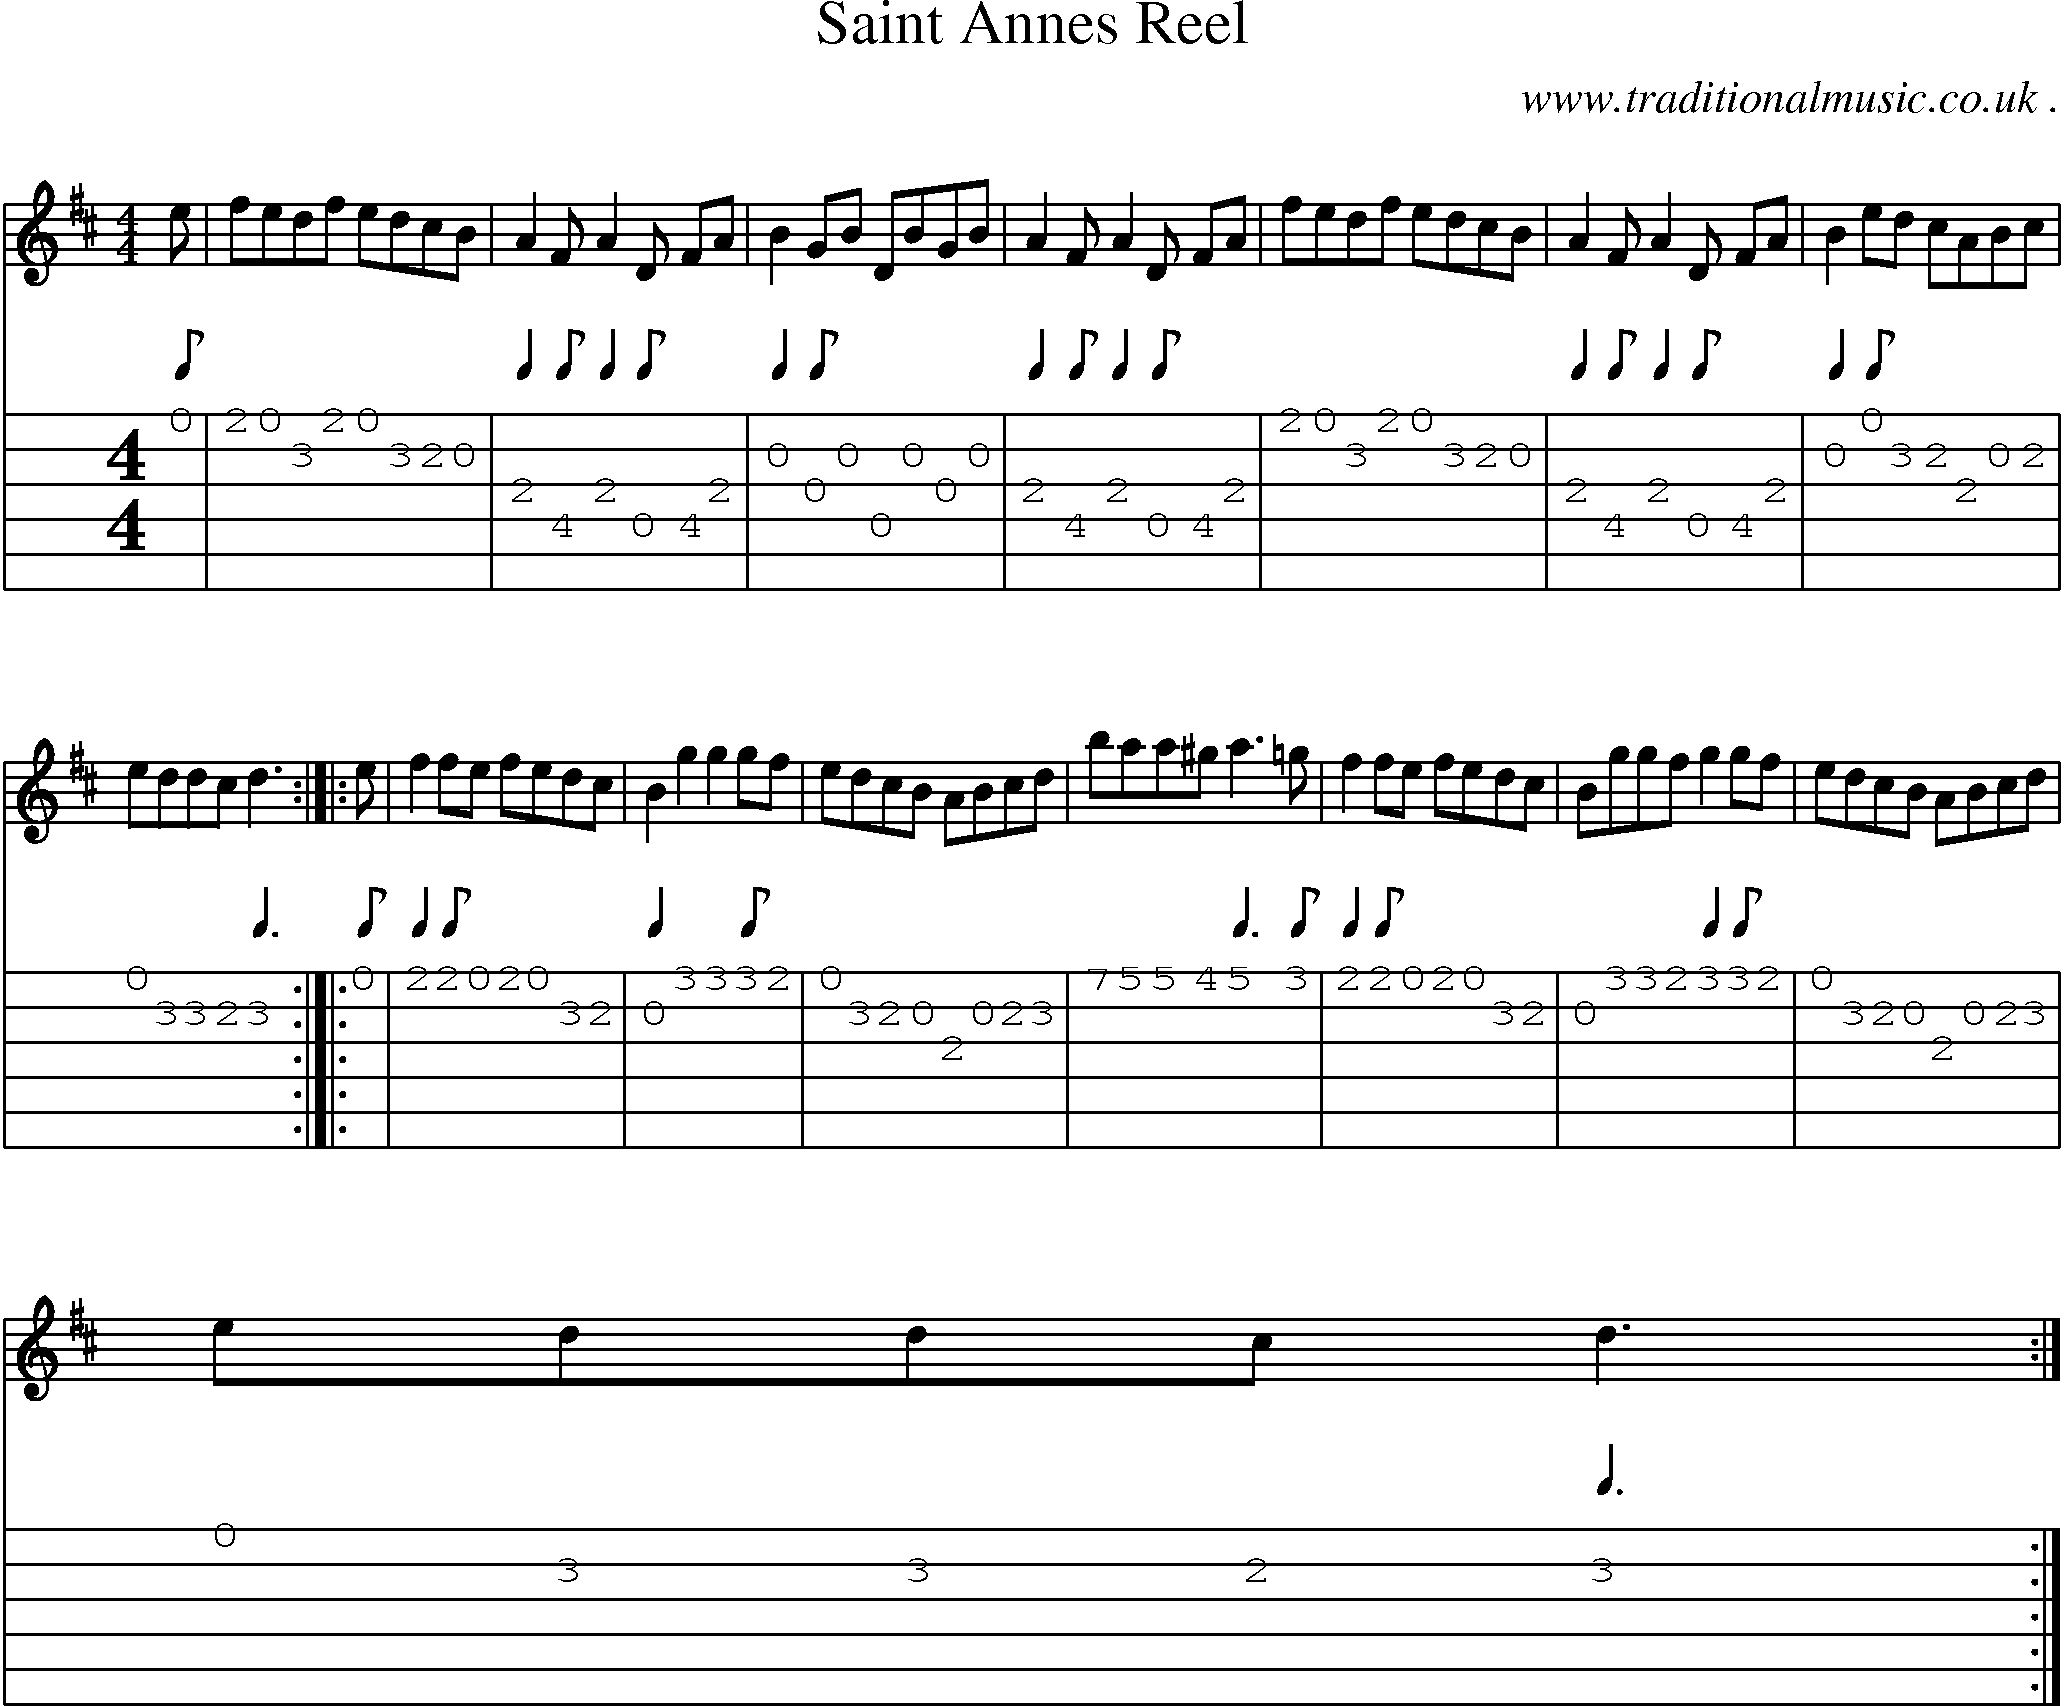 Sheet-music  score, Chords and Guitar Tabs for Saint Annes Reel